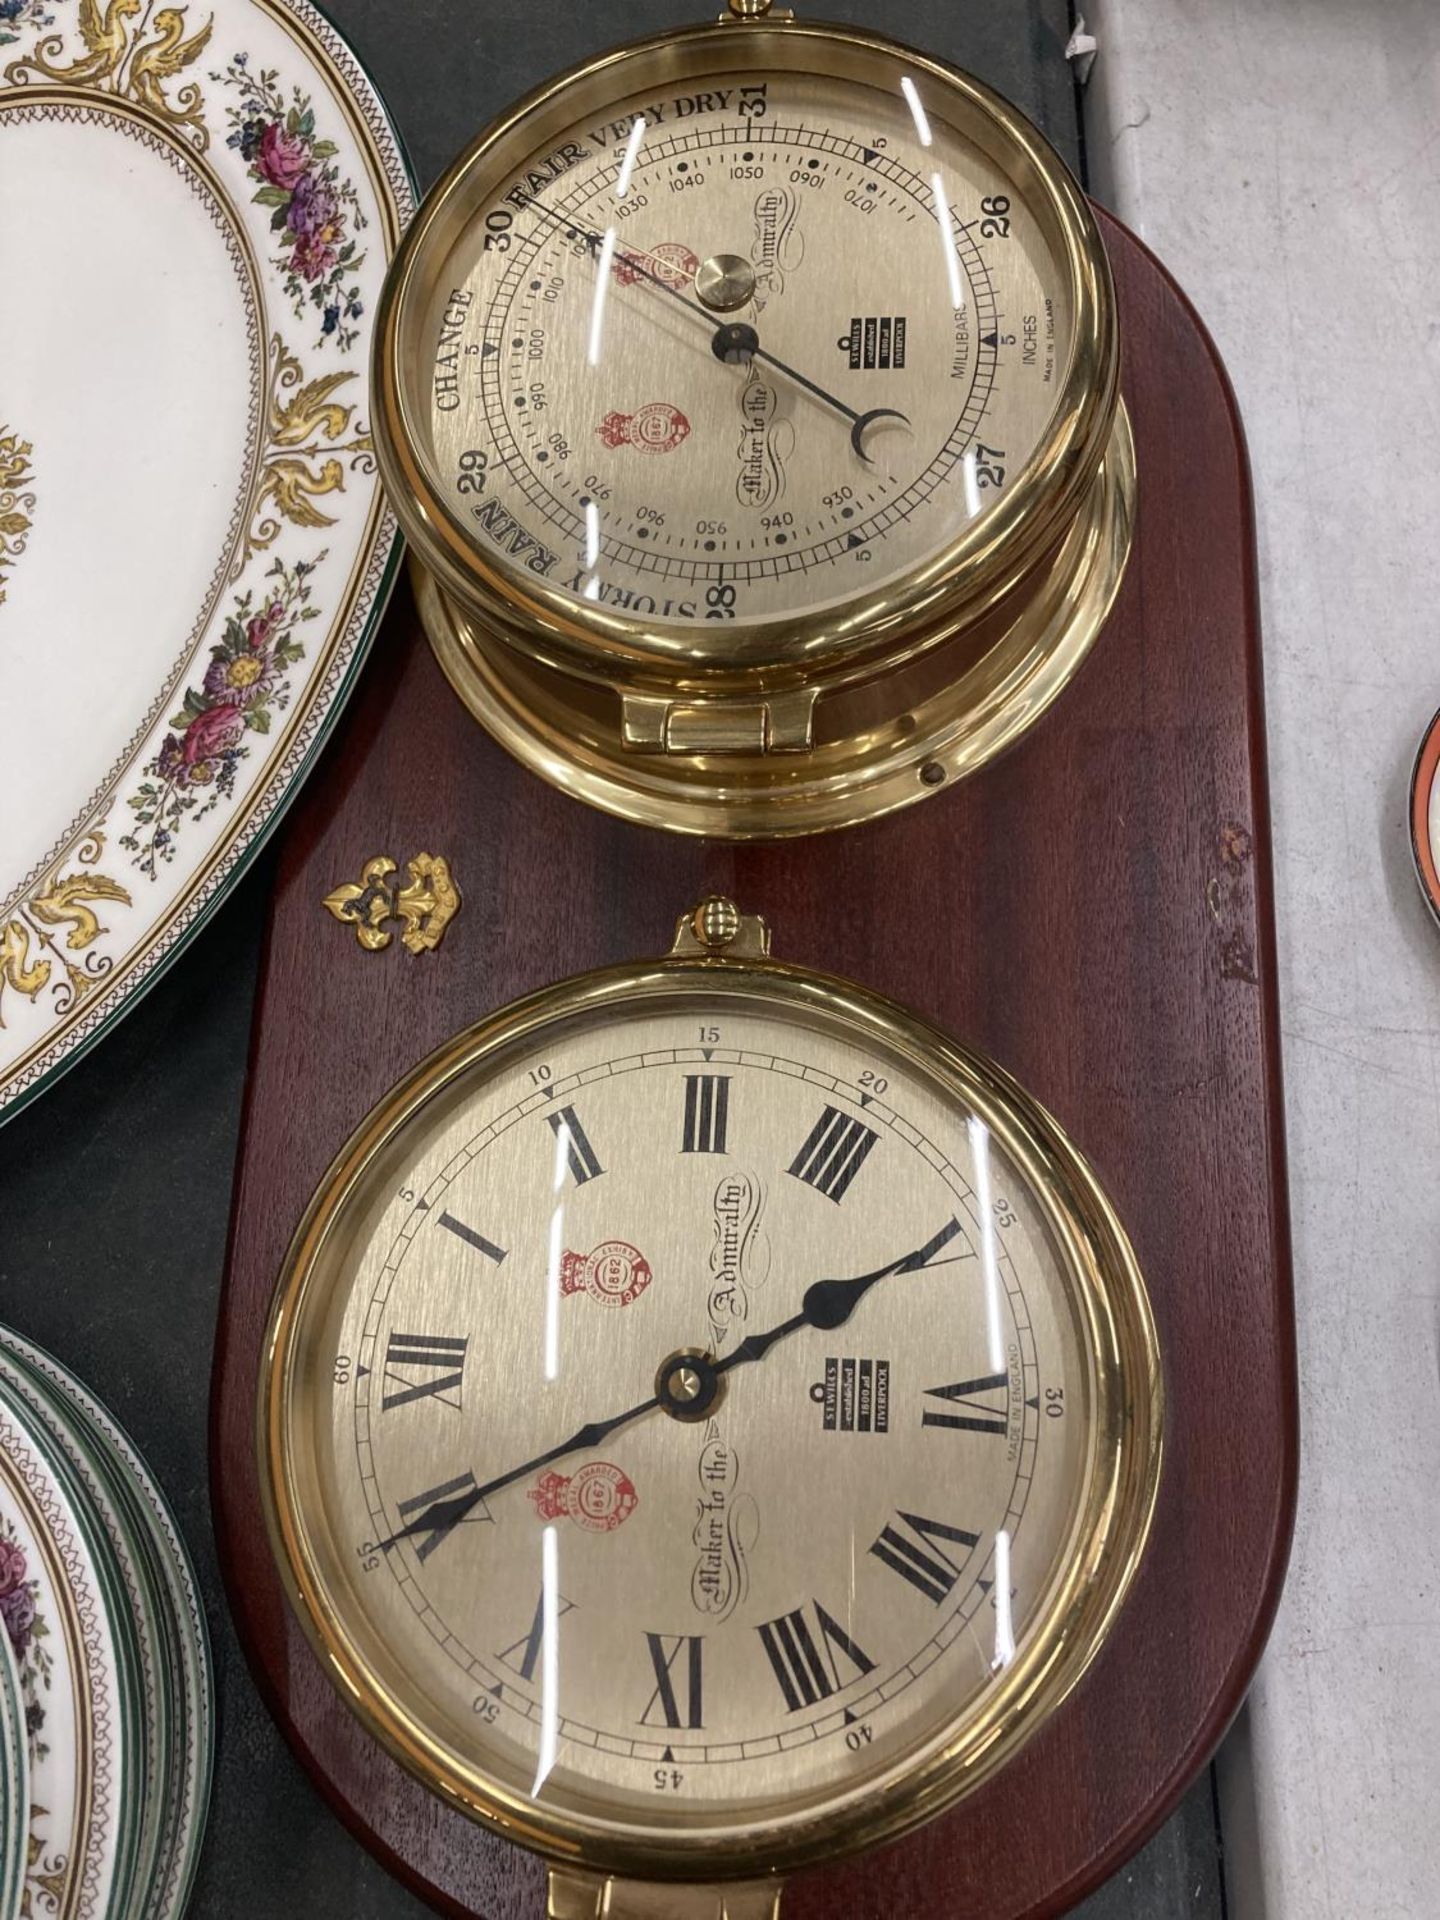 TWO BRASS BAROMETERS AND CLOCKS MOUNTED ON WOODEN PLINTHS - Image 3 of 3